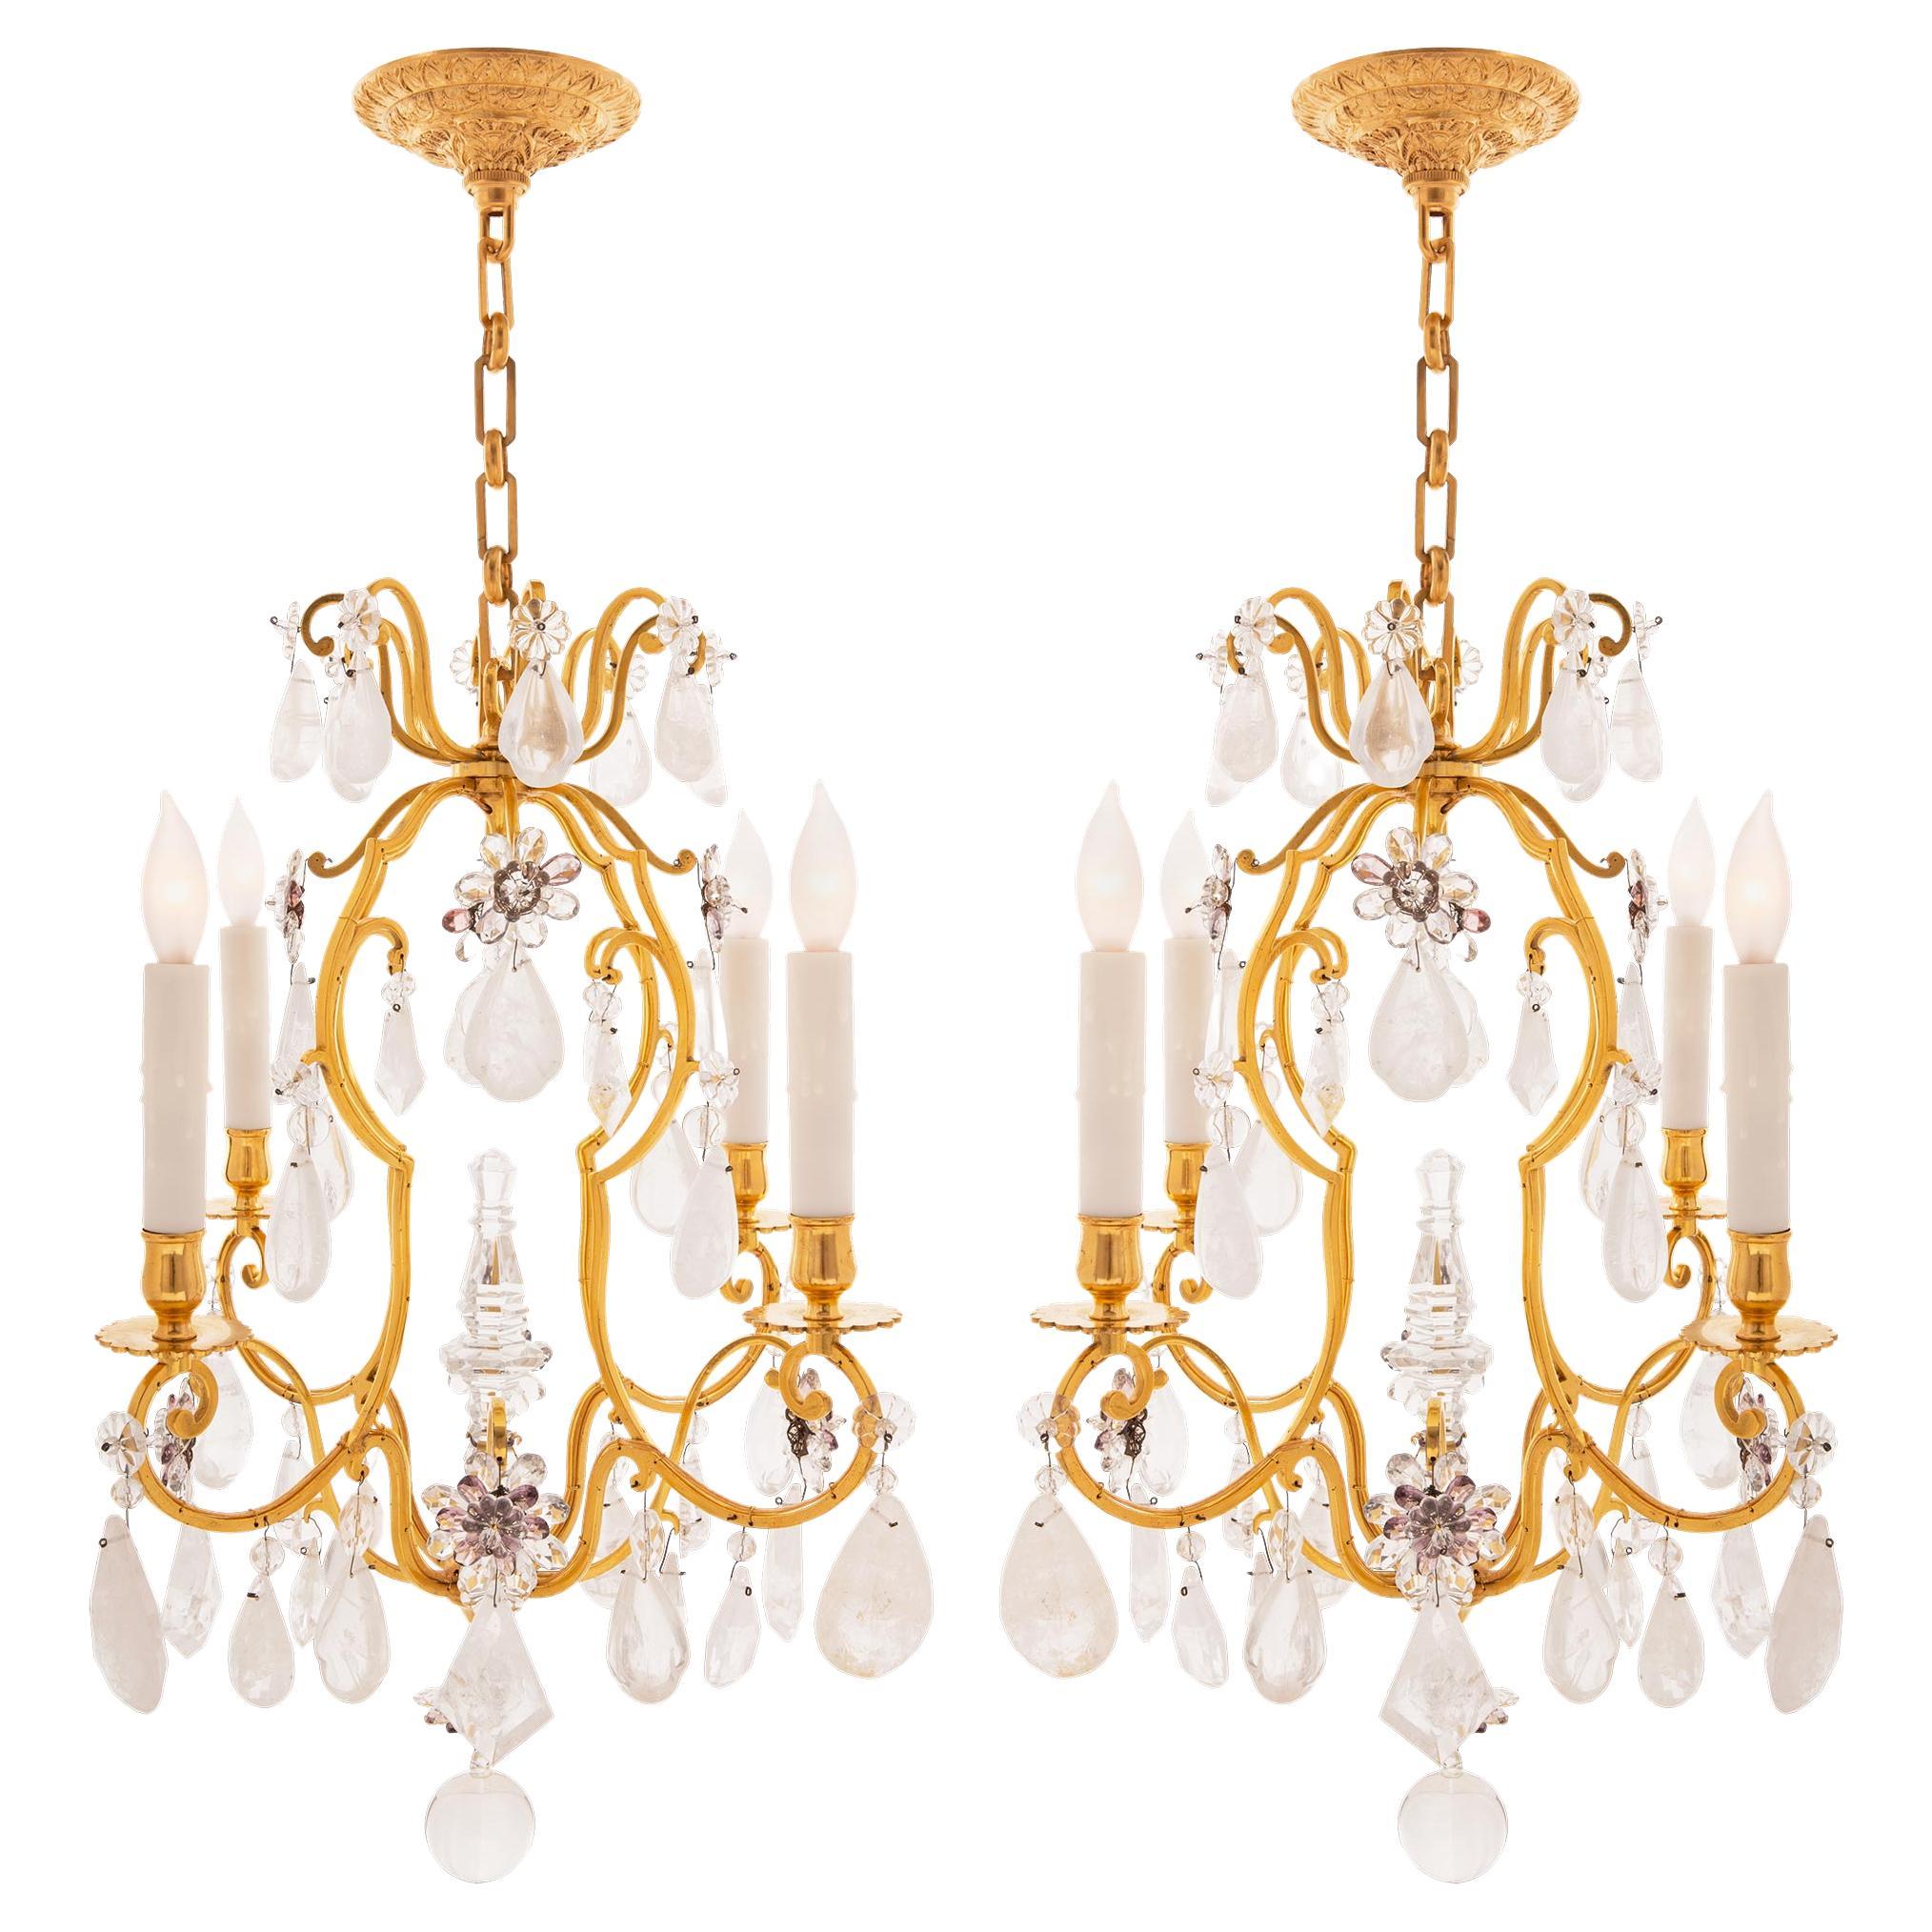 Pair of French Early 19th Century St. Rock Crystal and Glass Chandeliers For Sale